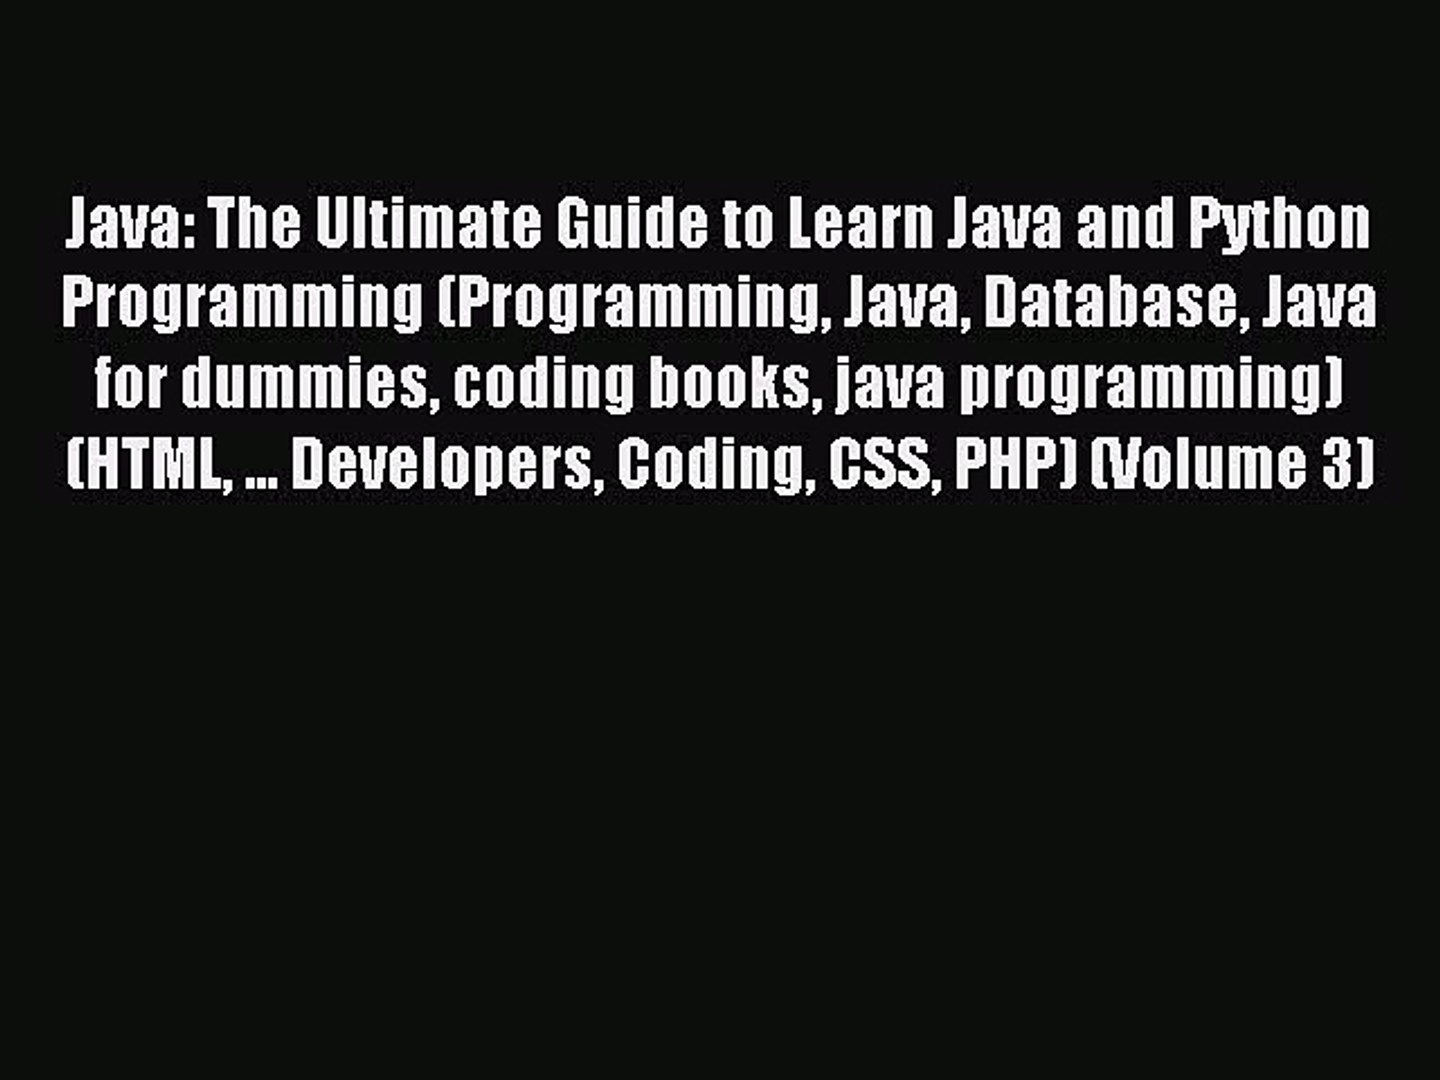 Read Java: The Ultimate Guide to Learn Java and Python Programming (Programming Java Database